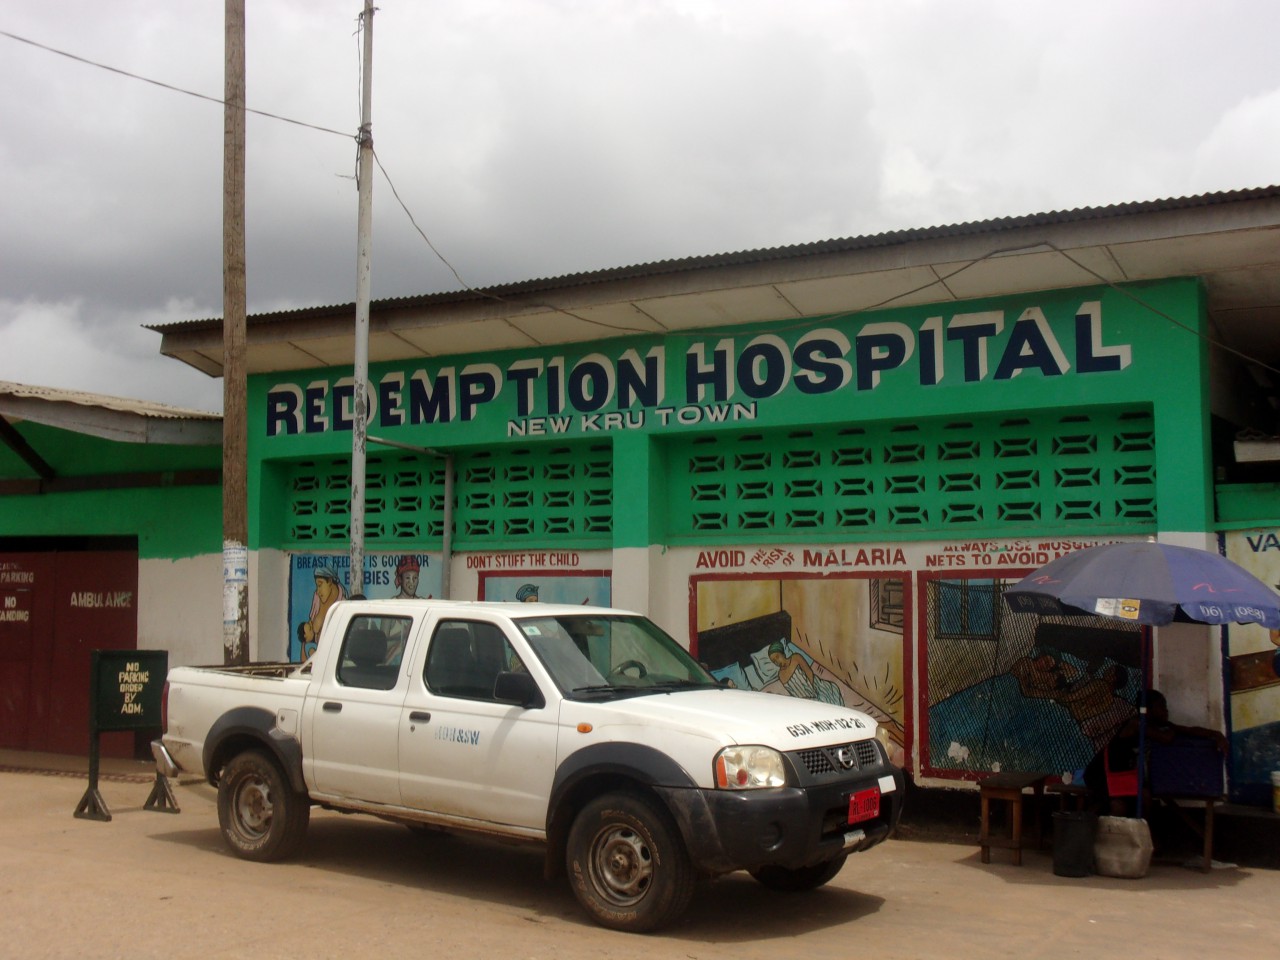 The Redemption Hospital in New Kru Town, Monrovia, Liberia where the first victims of the Ebola virus died. It was the workplace of Esther Kesselley, the first nurse to die in Liberia, and Dr. Samuel Mutoro a Ugandan doctor got the virus from Kesselly. He later died. (Photo courtesy of Rodney Sieh, editor of FrontPageAfrica)  